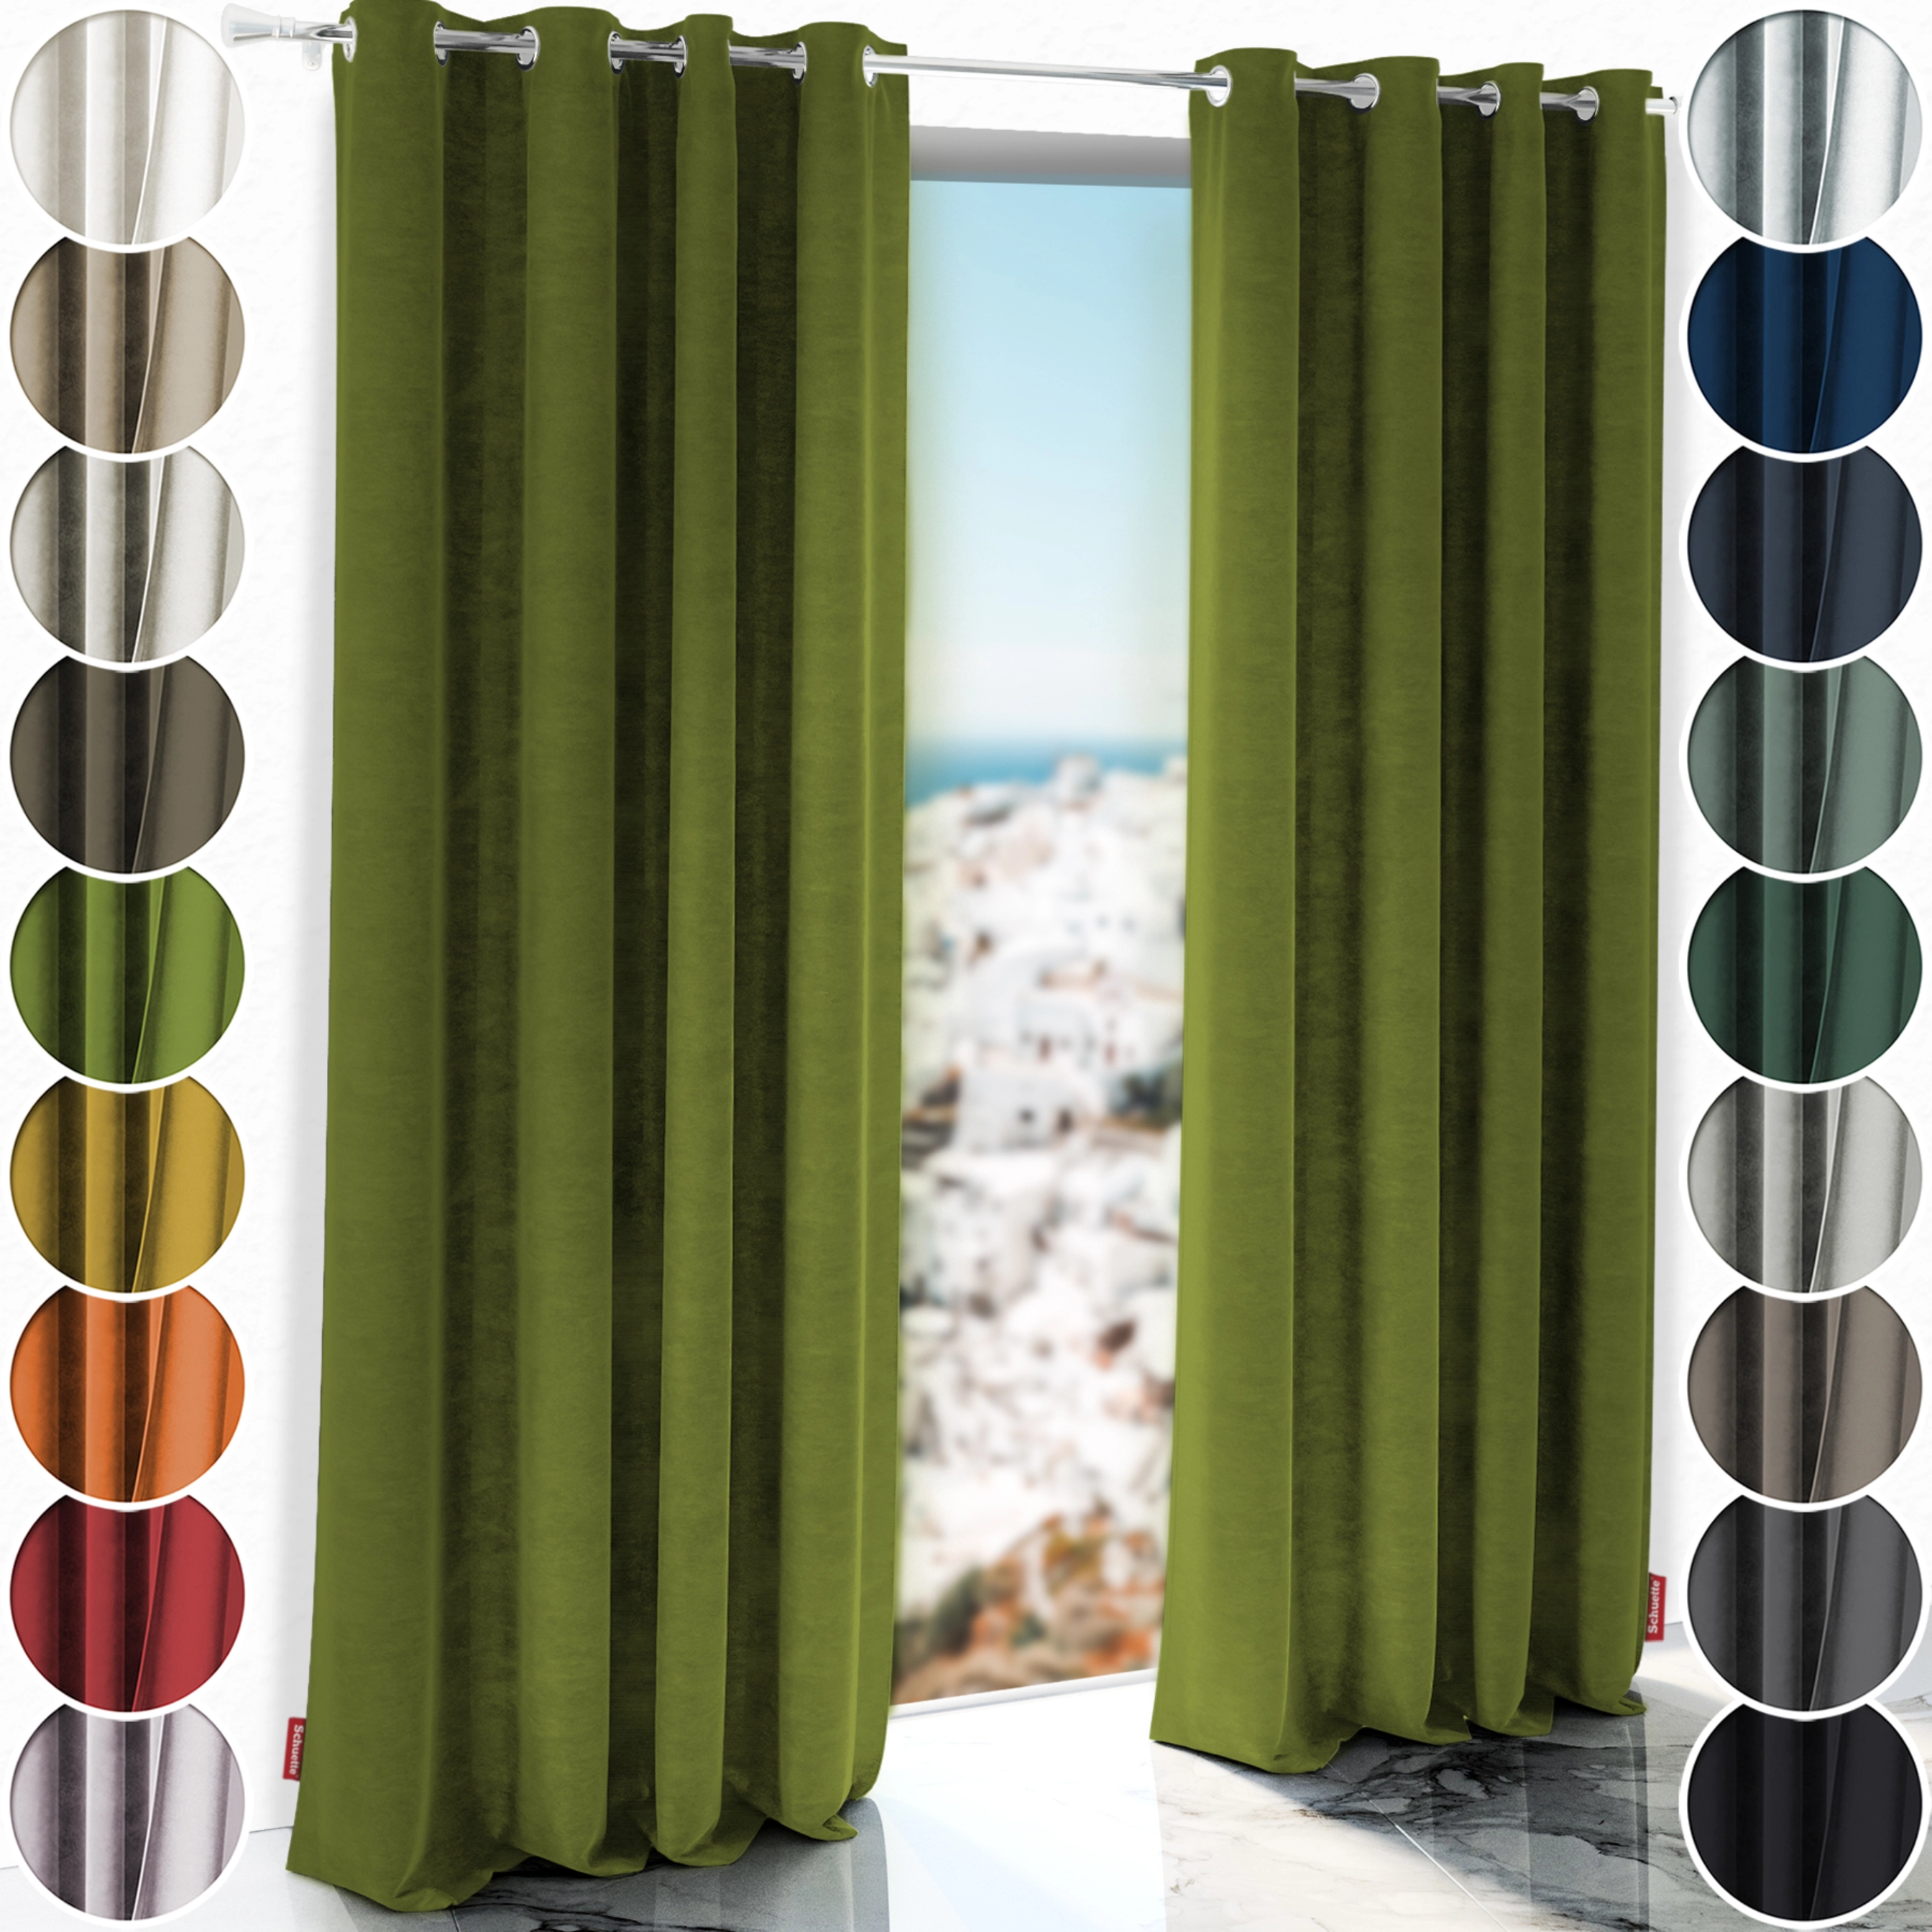 Schuette® Blackout Curtain with Eyelets ● Millenium Velvet Collection: Olives Garden (Green) ● 1 piece ● Crease-resistant Easy-care Thermo Opaque & heavily darkening